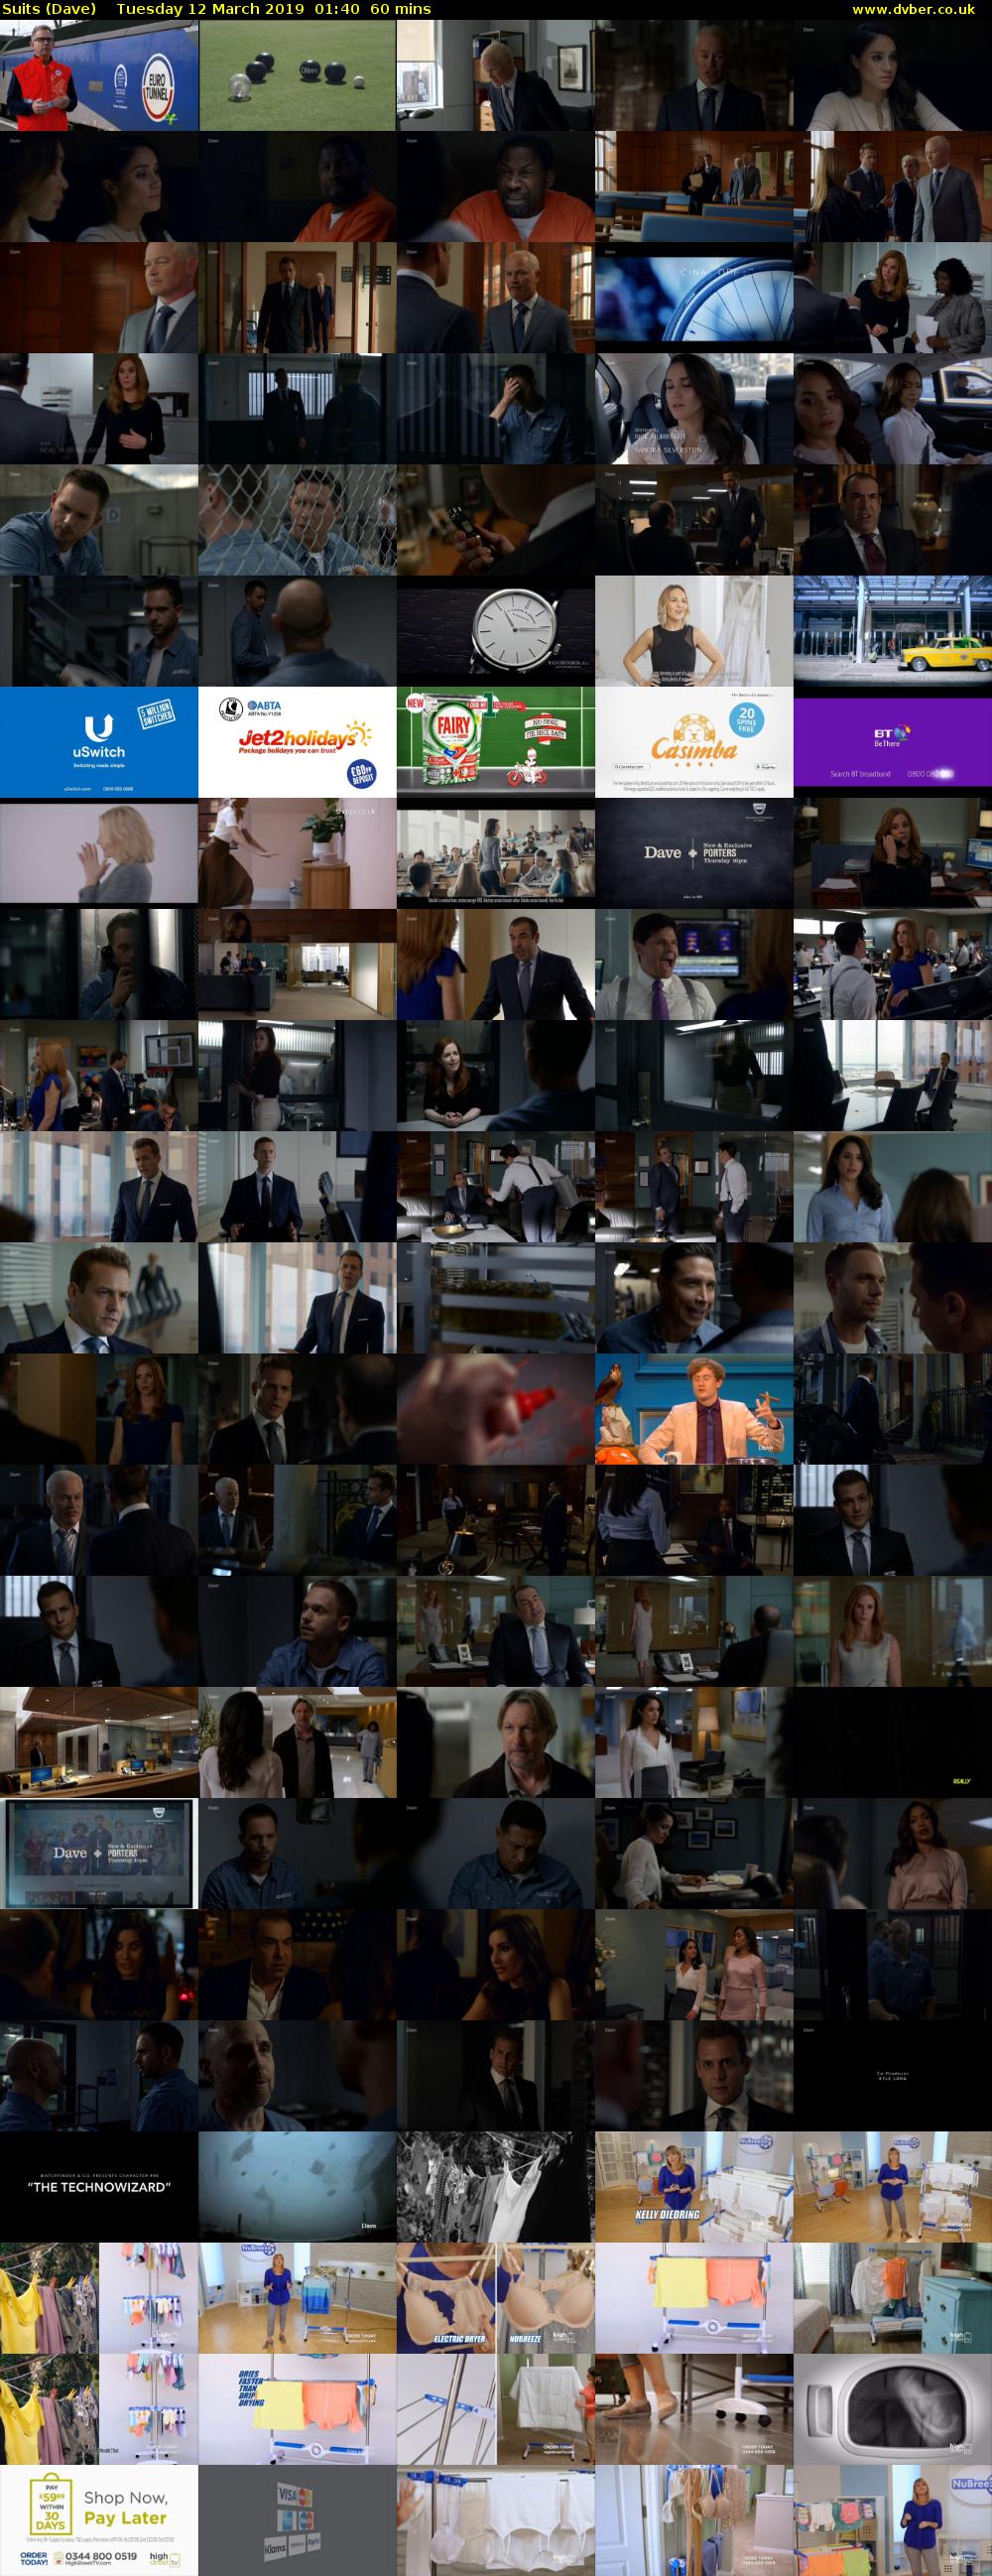 Suits (Dave) Tuesday 12 March 2019 01:40 - 02:40